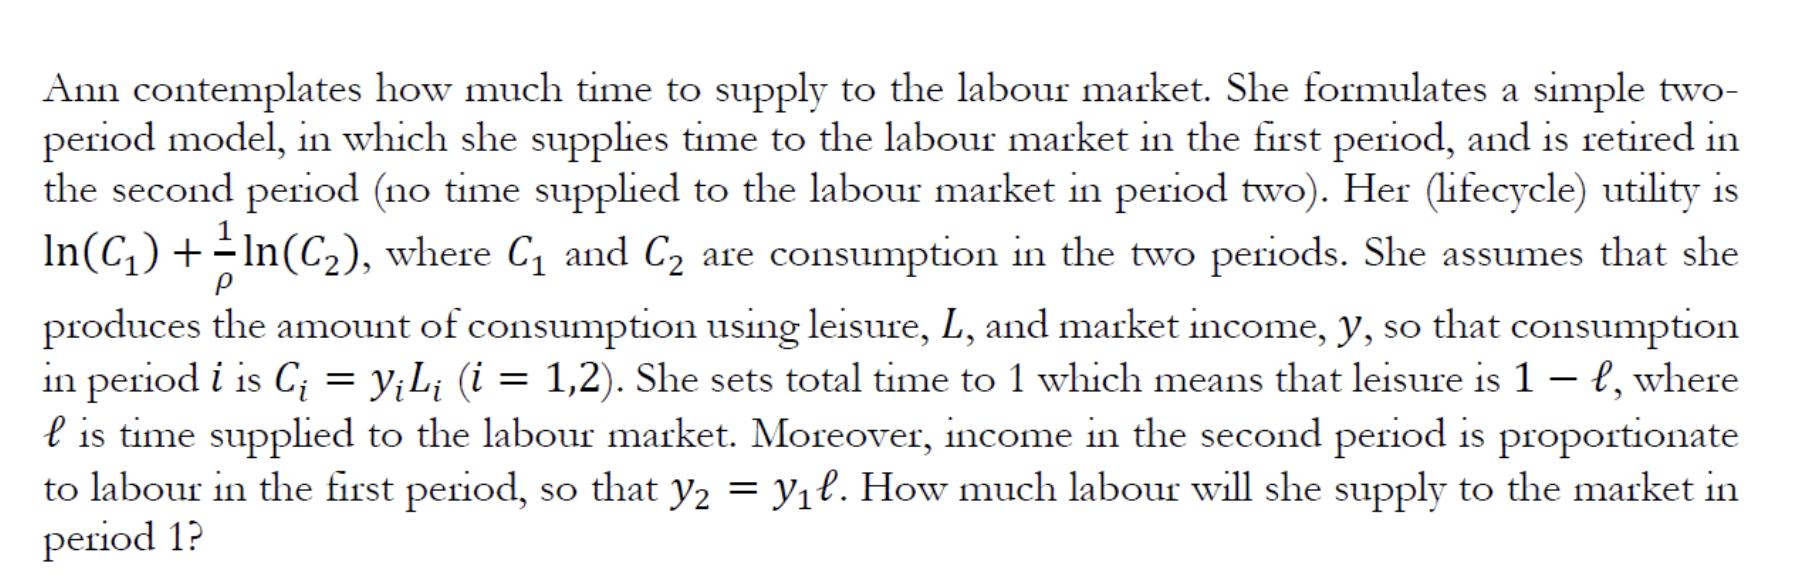 Ann contemplates how much time to supply to the labour market. She formulates a simple two- period model, in which she suppli